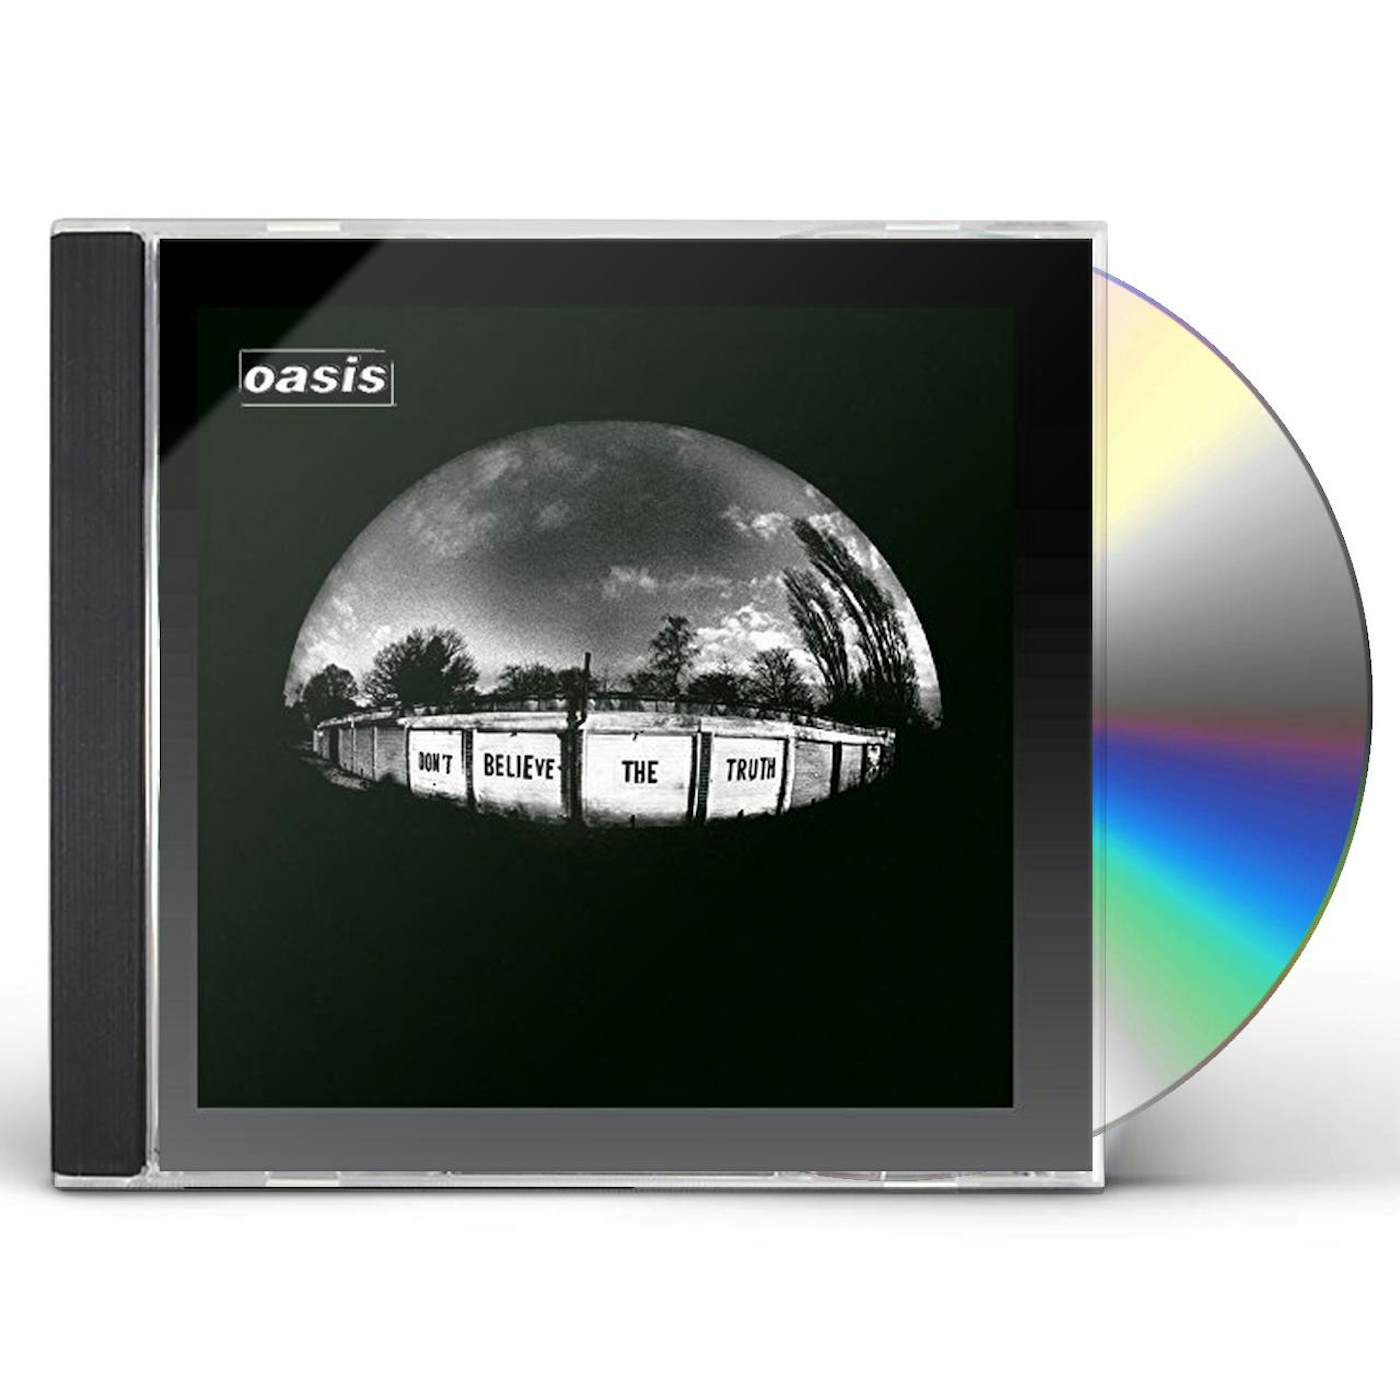 Oasis DON'T BELIEVE TRUTH CD